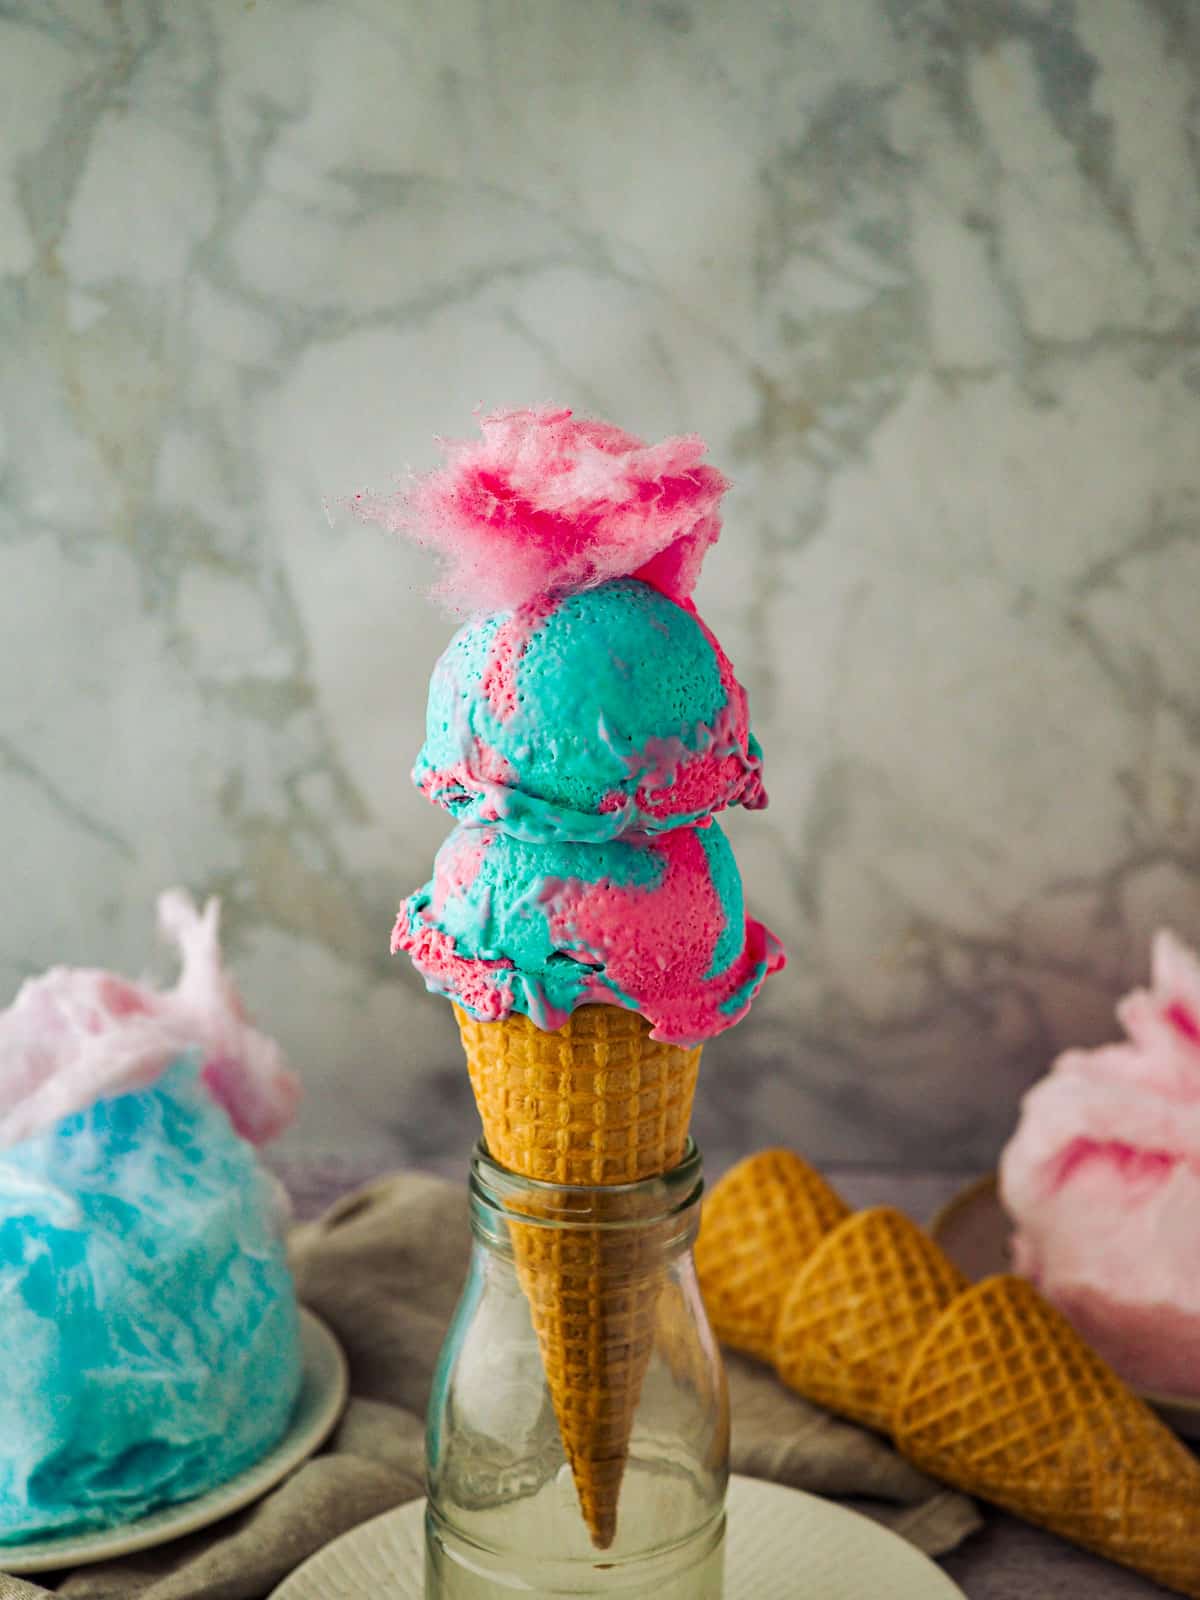 Two scoops of homemade pink and blue cotton candy in a cone.